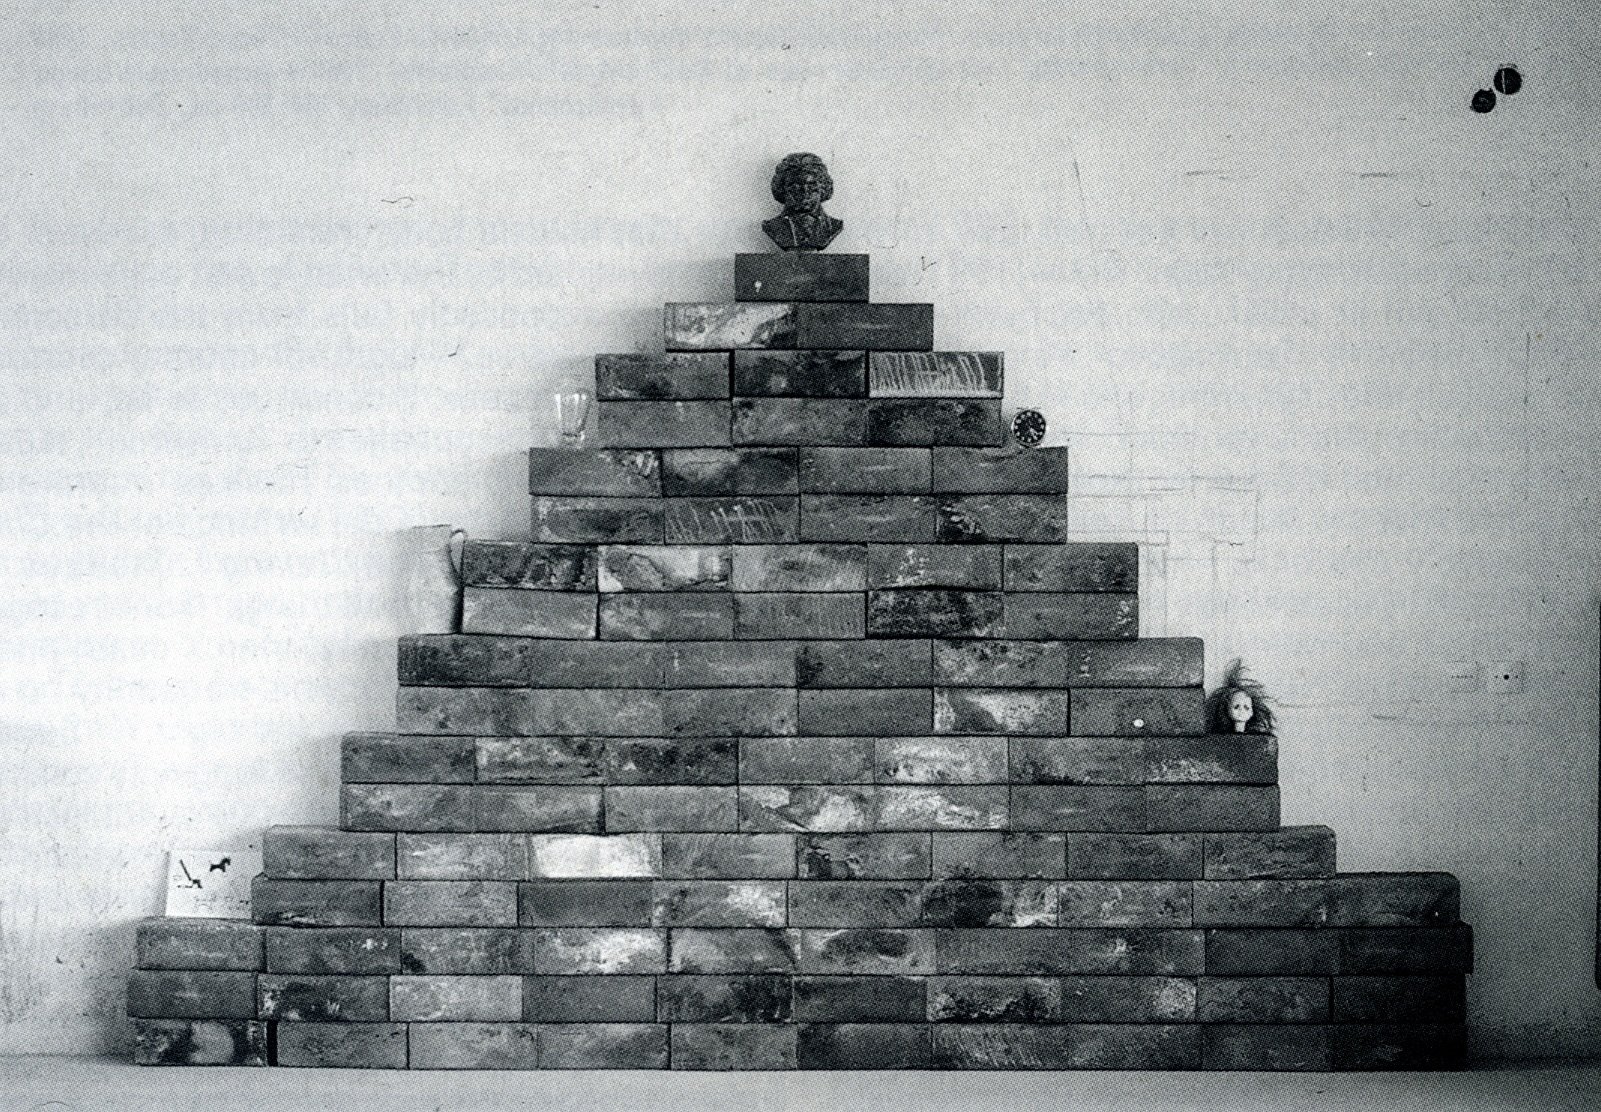 Thanasis Totsikas, The Stairway of Life, metal boxes, 300 x 250 x 15 cm (118 1/8 x 98 3/8 x 5 7/8 in), 1988. Installation view, Hyper-product, Club 22, Athens, 1988